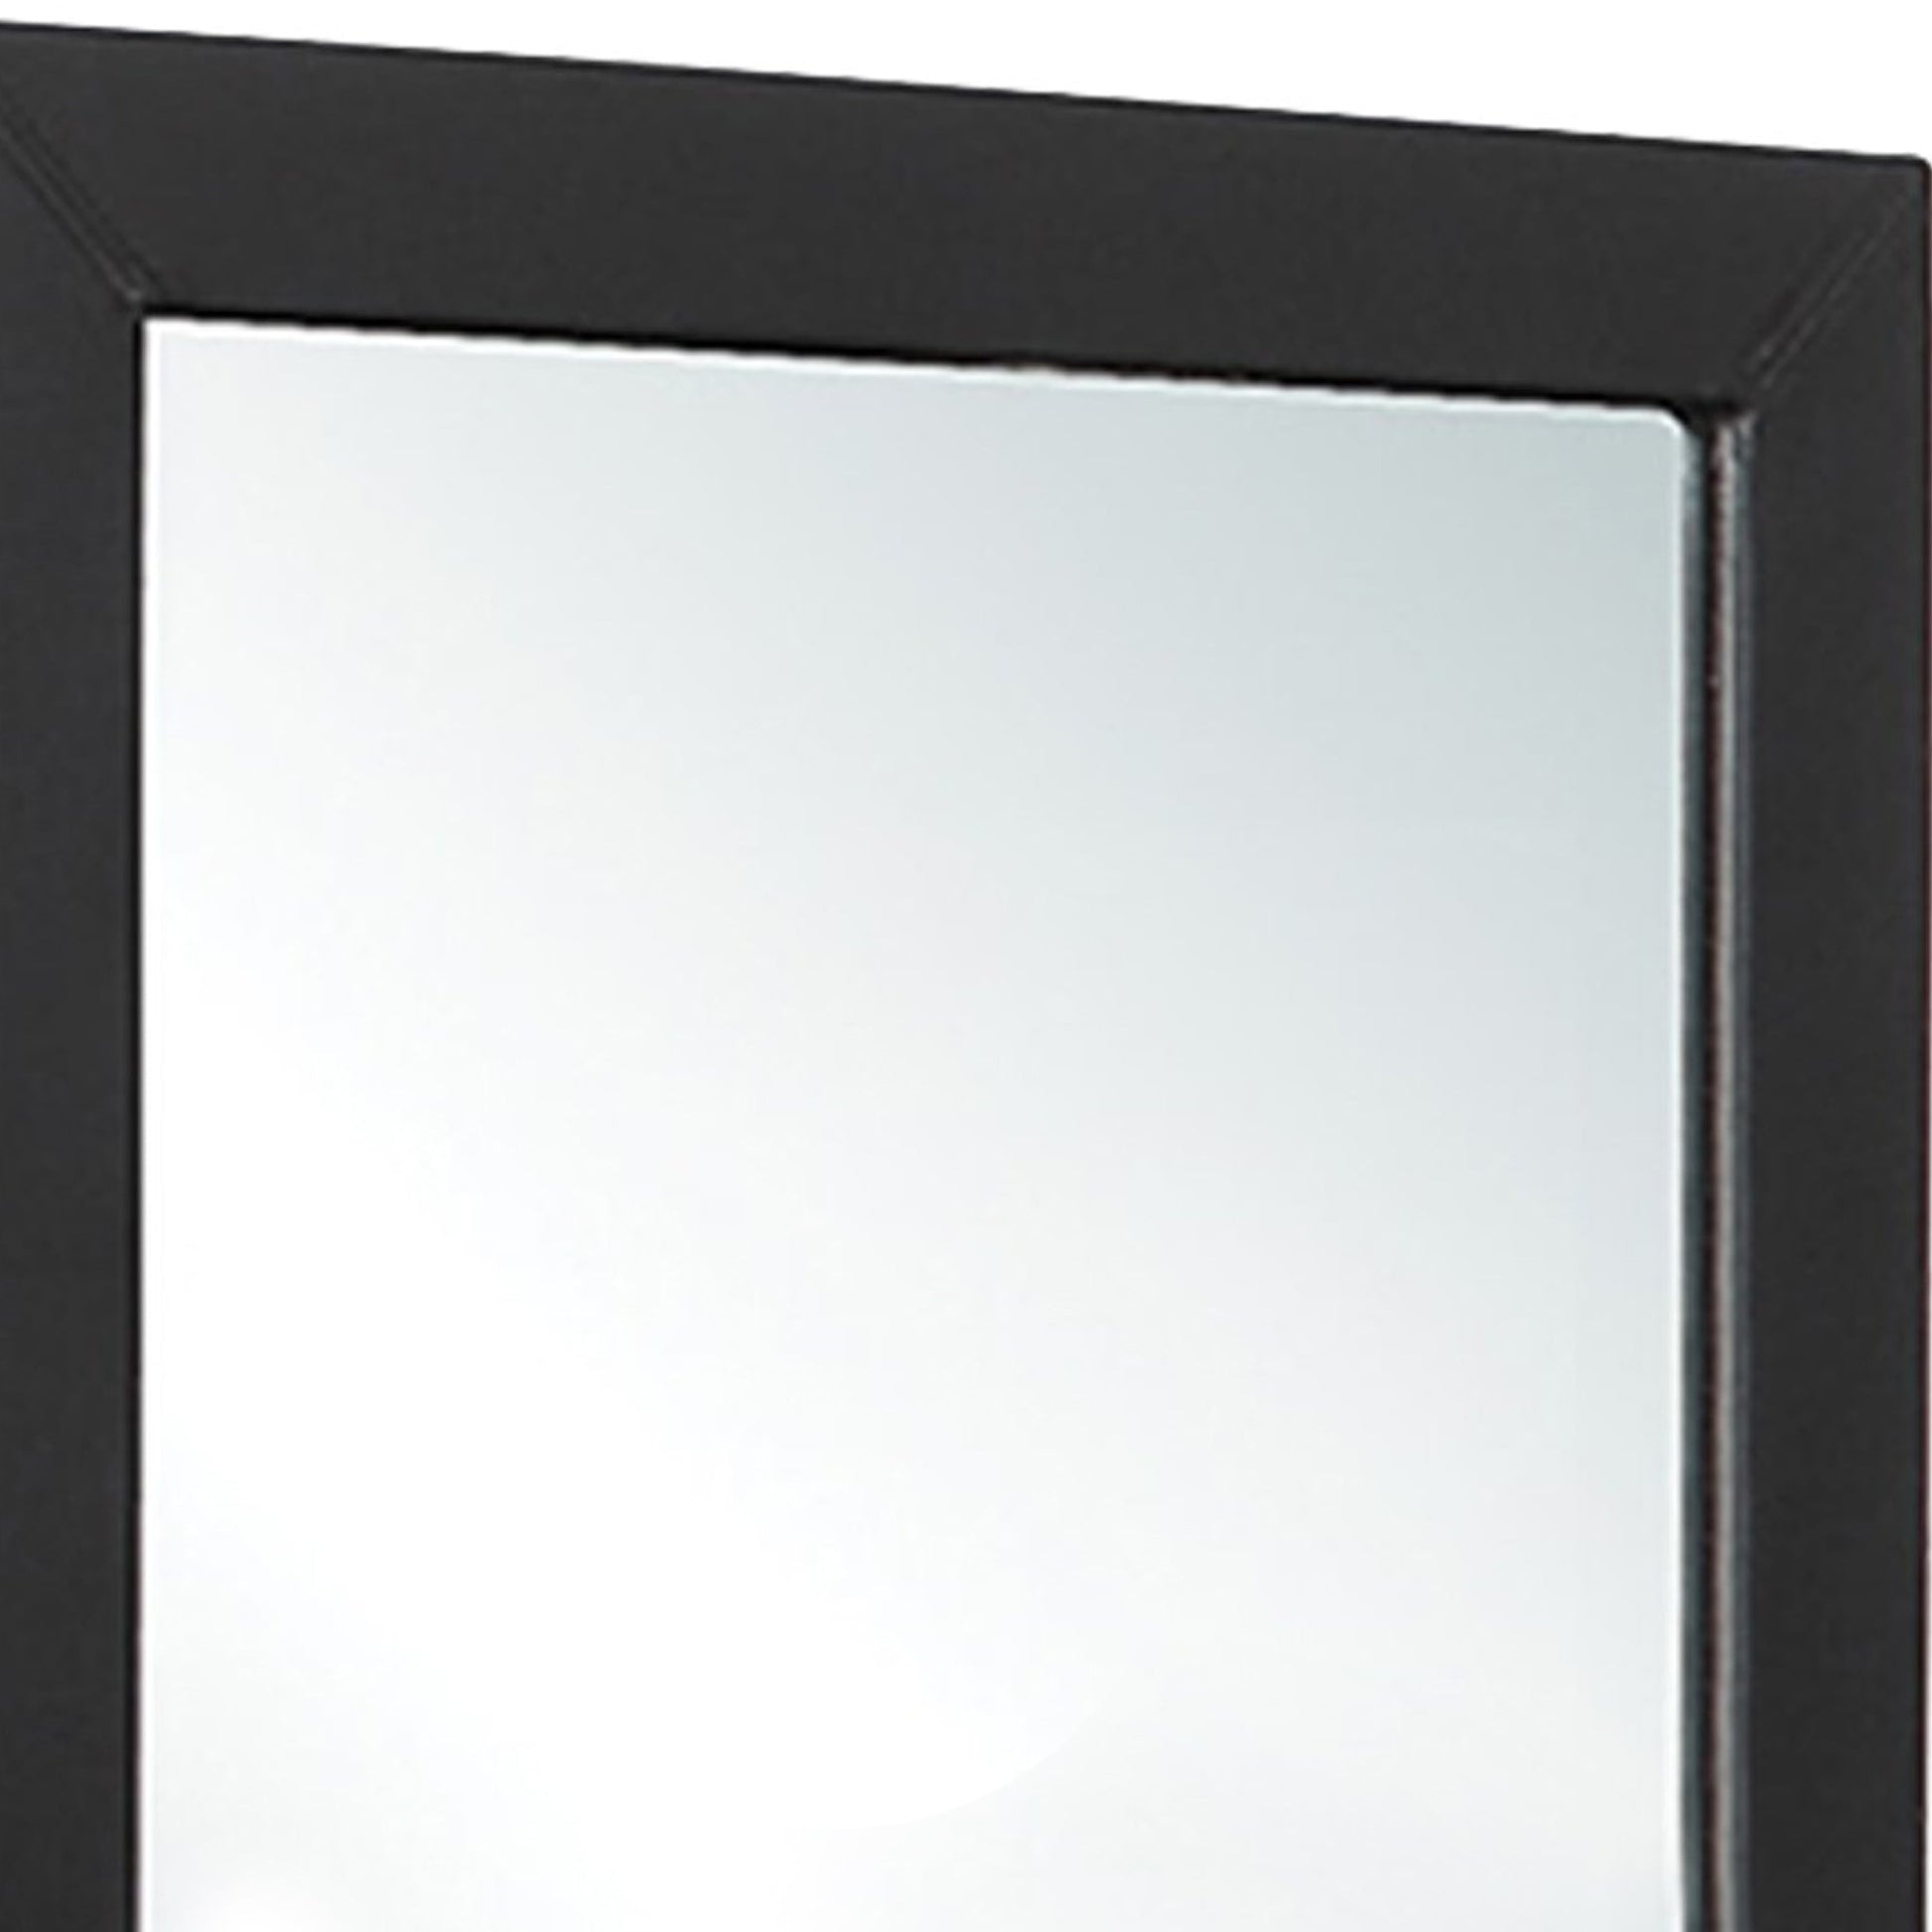 Benzara Black Rectangular Wood Encased Mirror With Faux Leather Upholstery